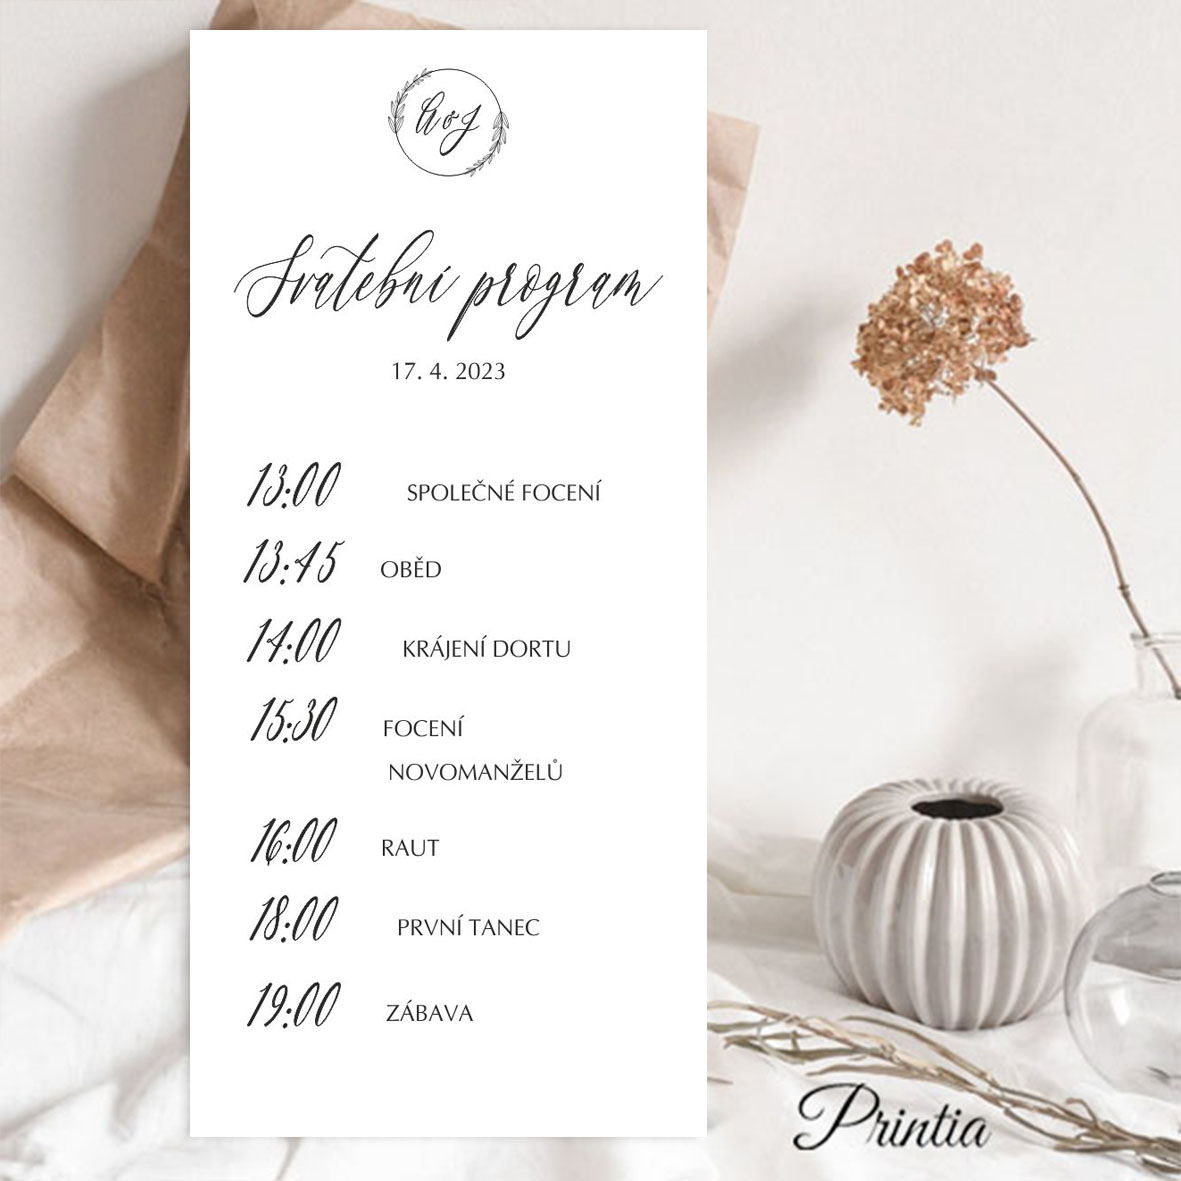 Wedding day schedule with a wreath with initials